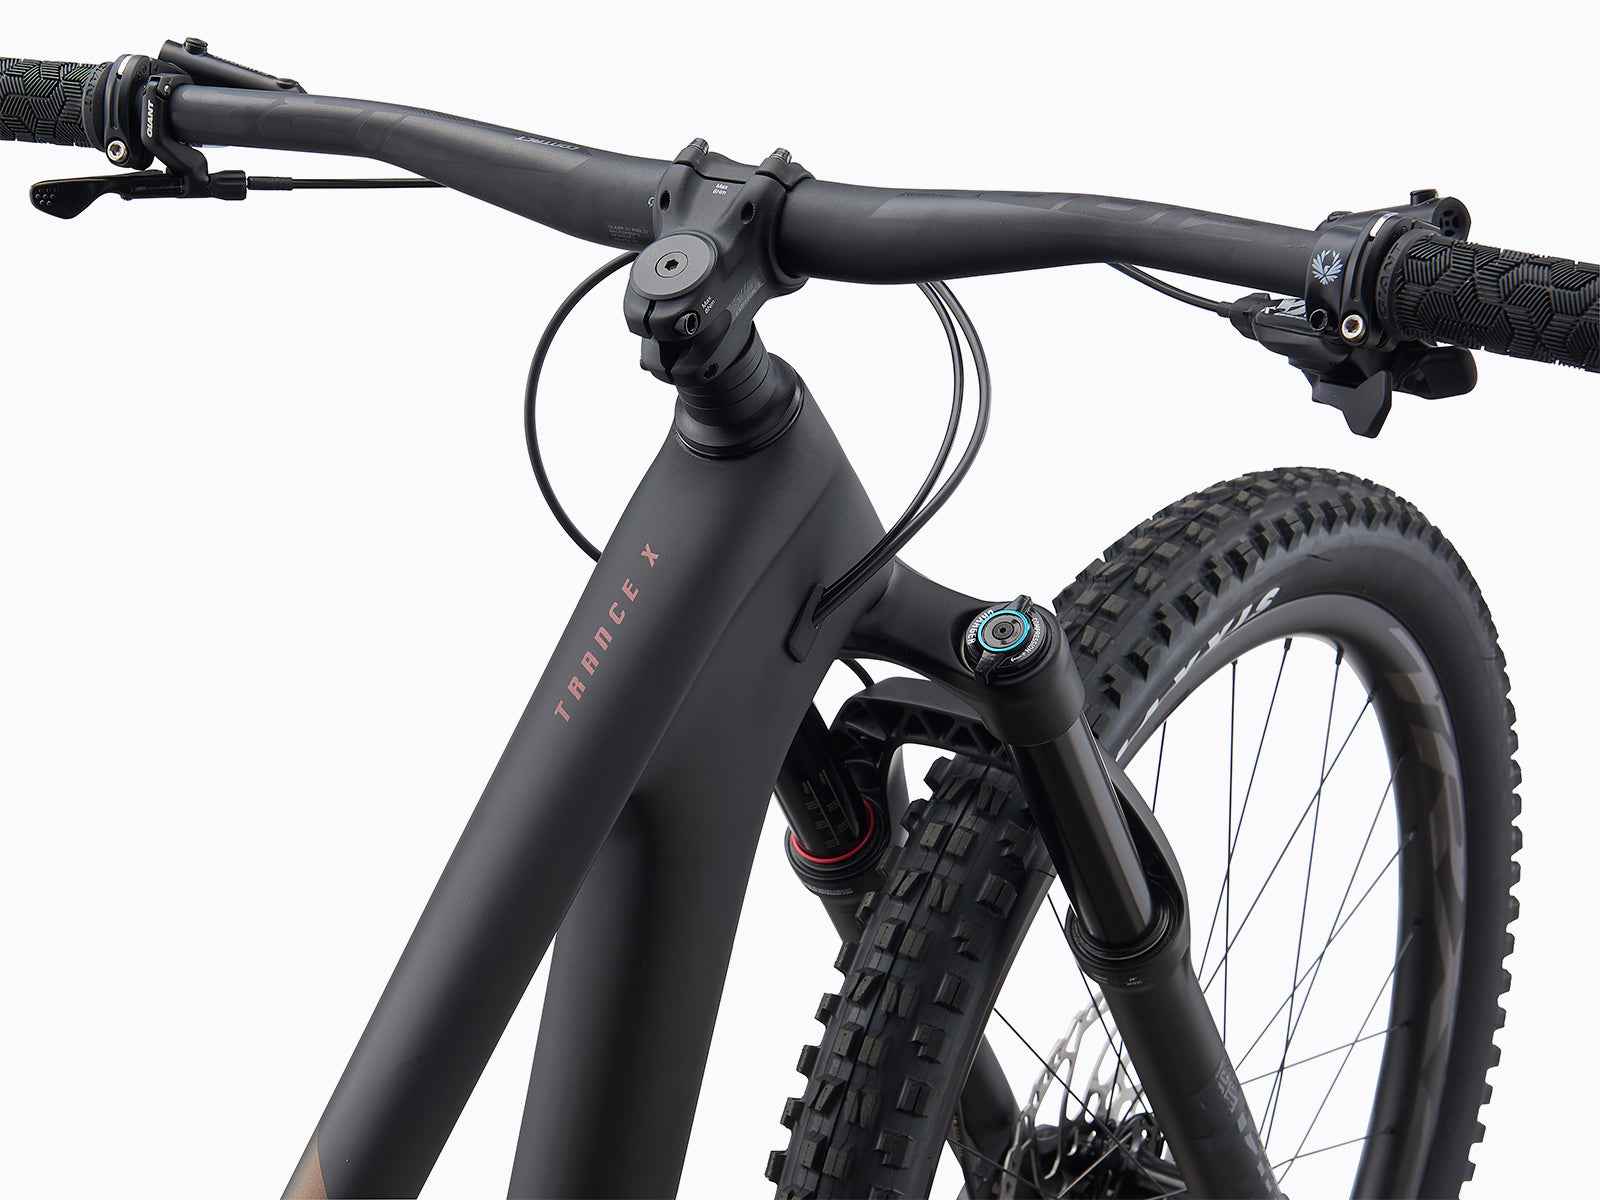 Image features a Giant Trance x advanced Pro 29 2, a fat bike from giants trail bike collection